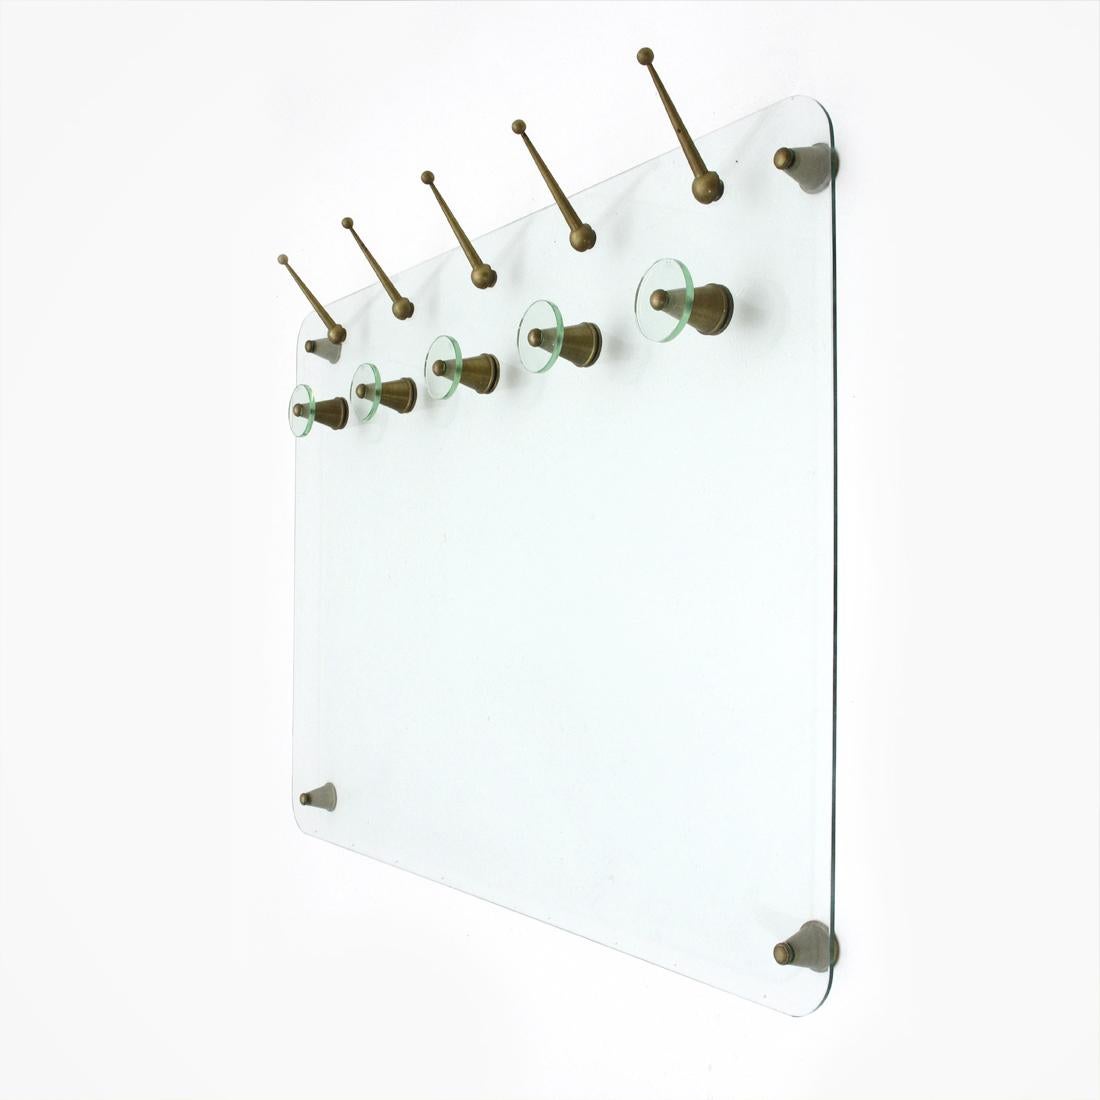 Elegant wall hanger of Italian manufacture, produced in the 1950s.
Glass body.
Brass spacers and hooks.
Brass and glass hangers.
Vitrex branded glass.
Good general conditions, some signs due to normal use over time.

Dimensions: Width 164 cm,